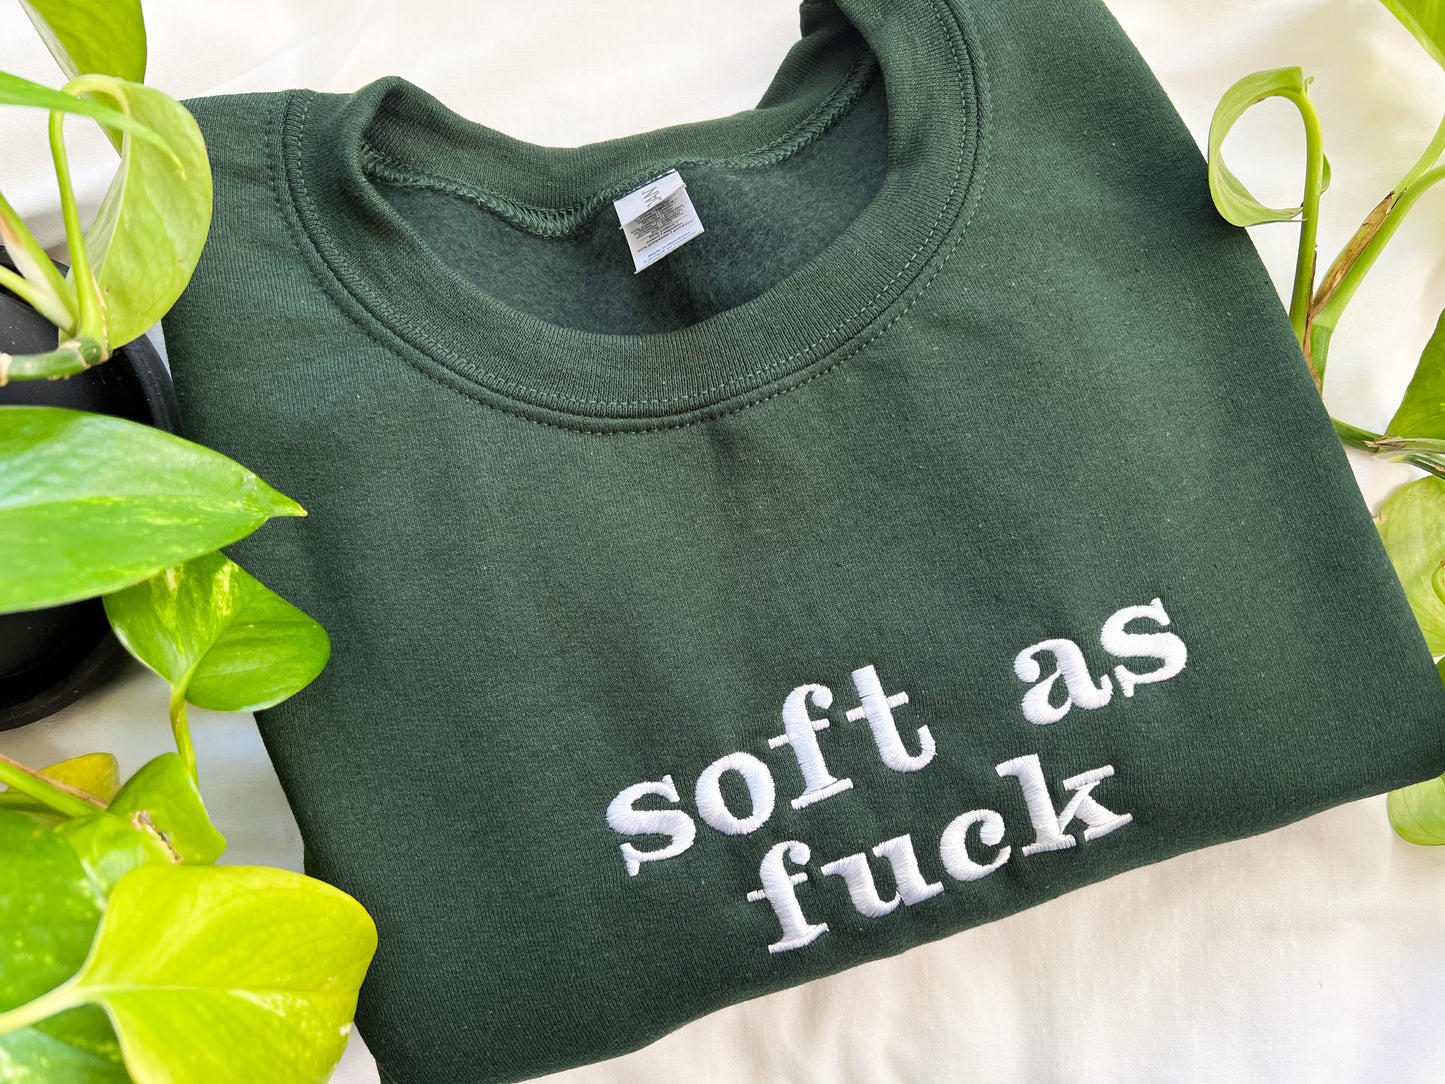 soft as fuck embroidered crewneck (PREORDER-forest green)